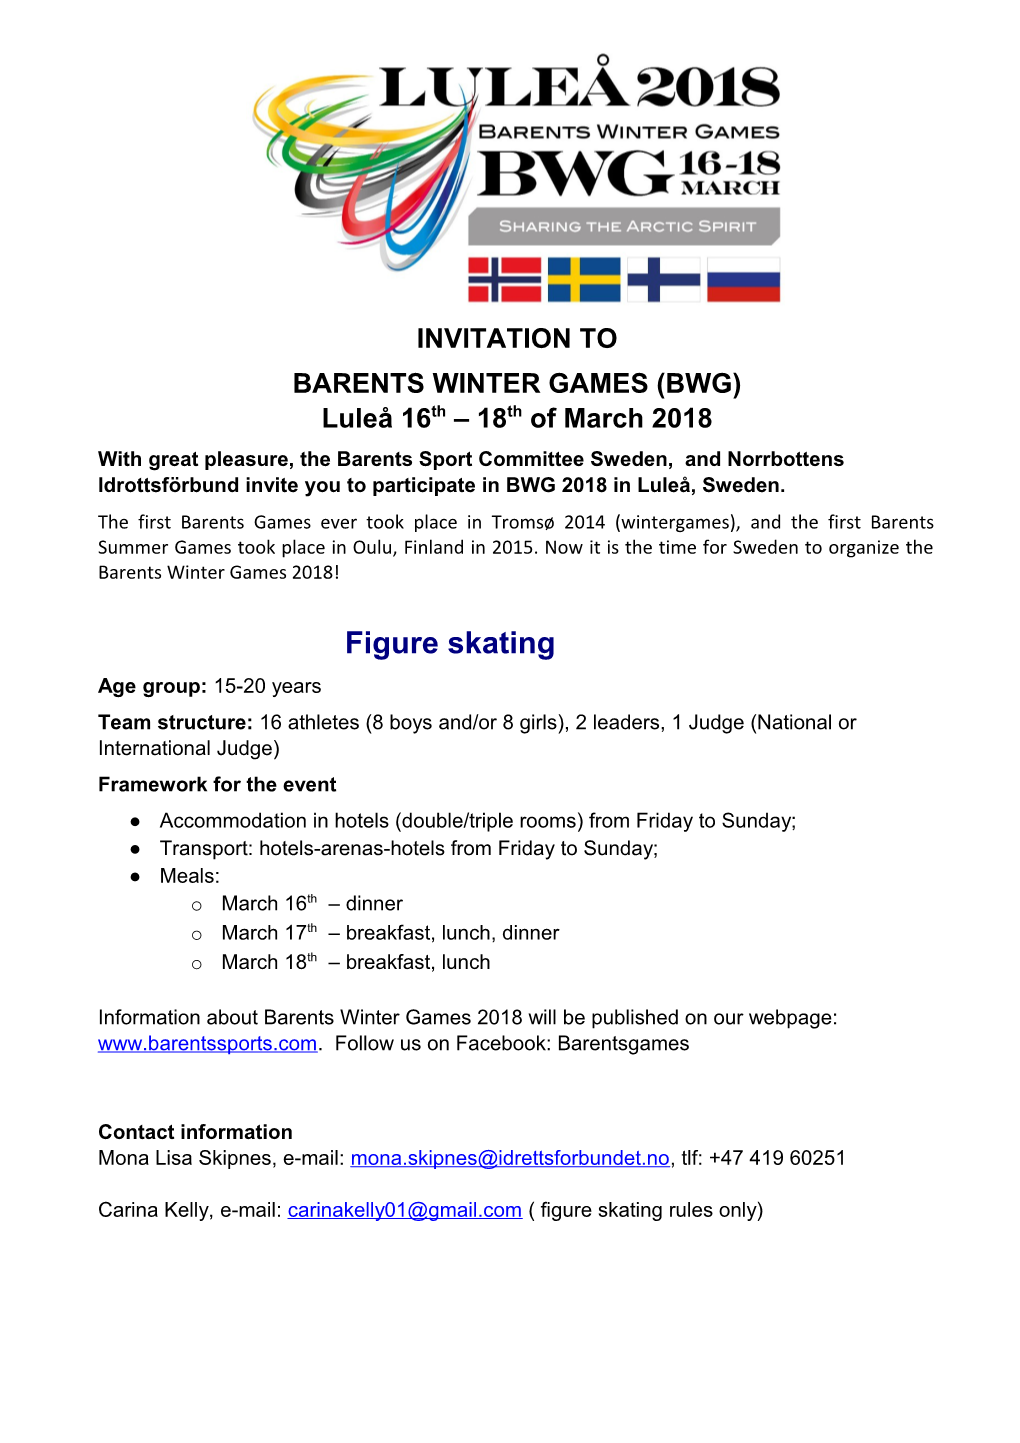 BARENTS WINTER GAMES (BWG) Luleå 16Th 18Th of March 2018